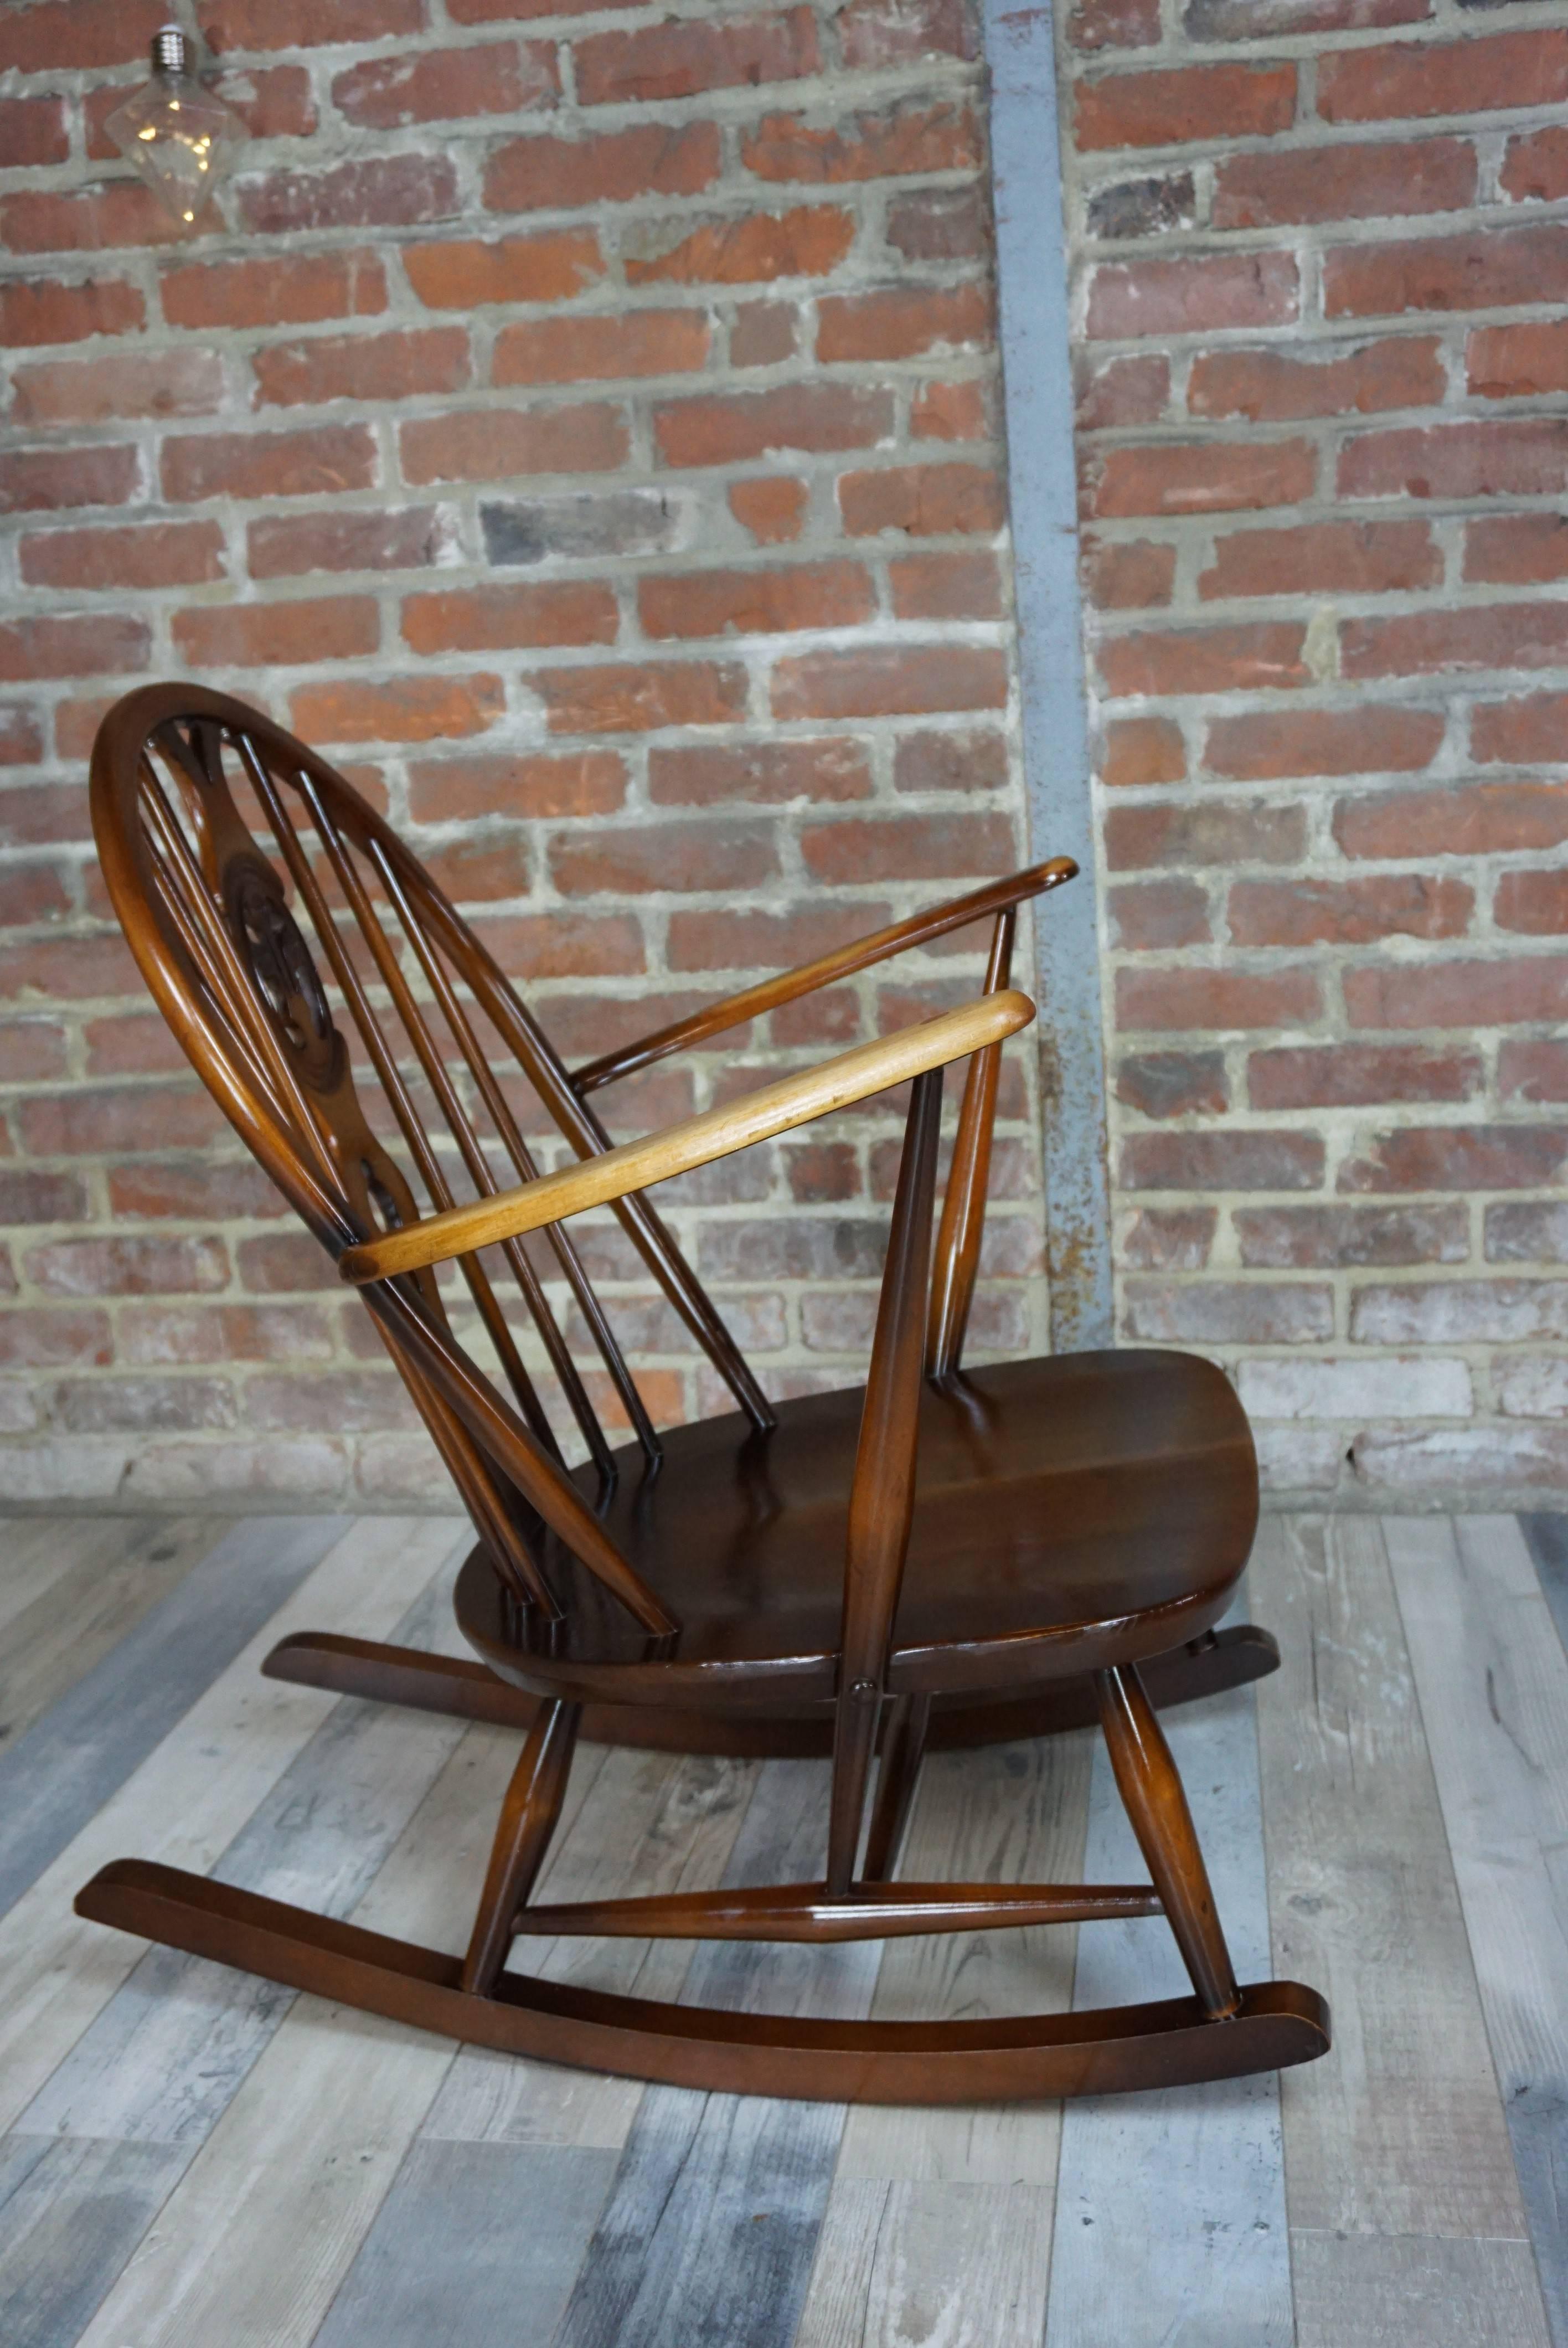 British Colonial Rocking Chair 1950s Ercol with Cushions